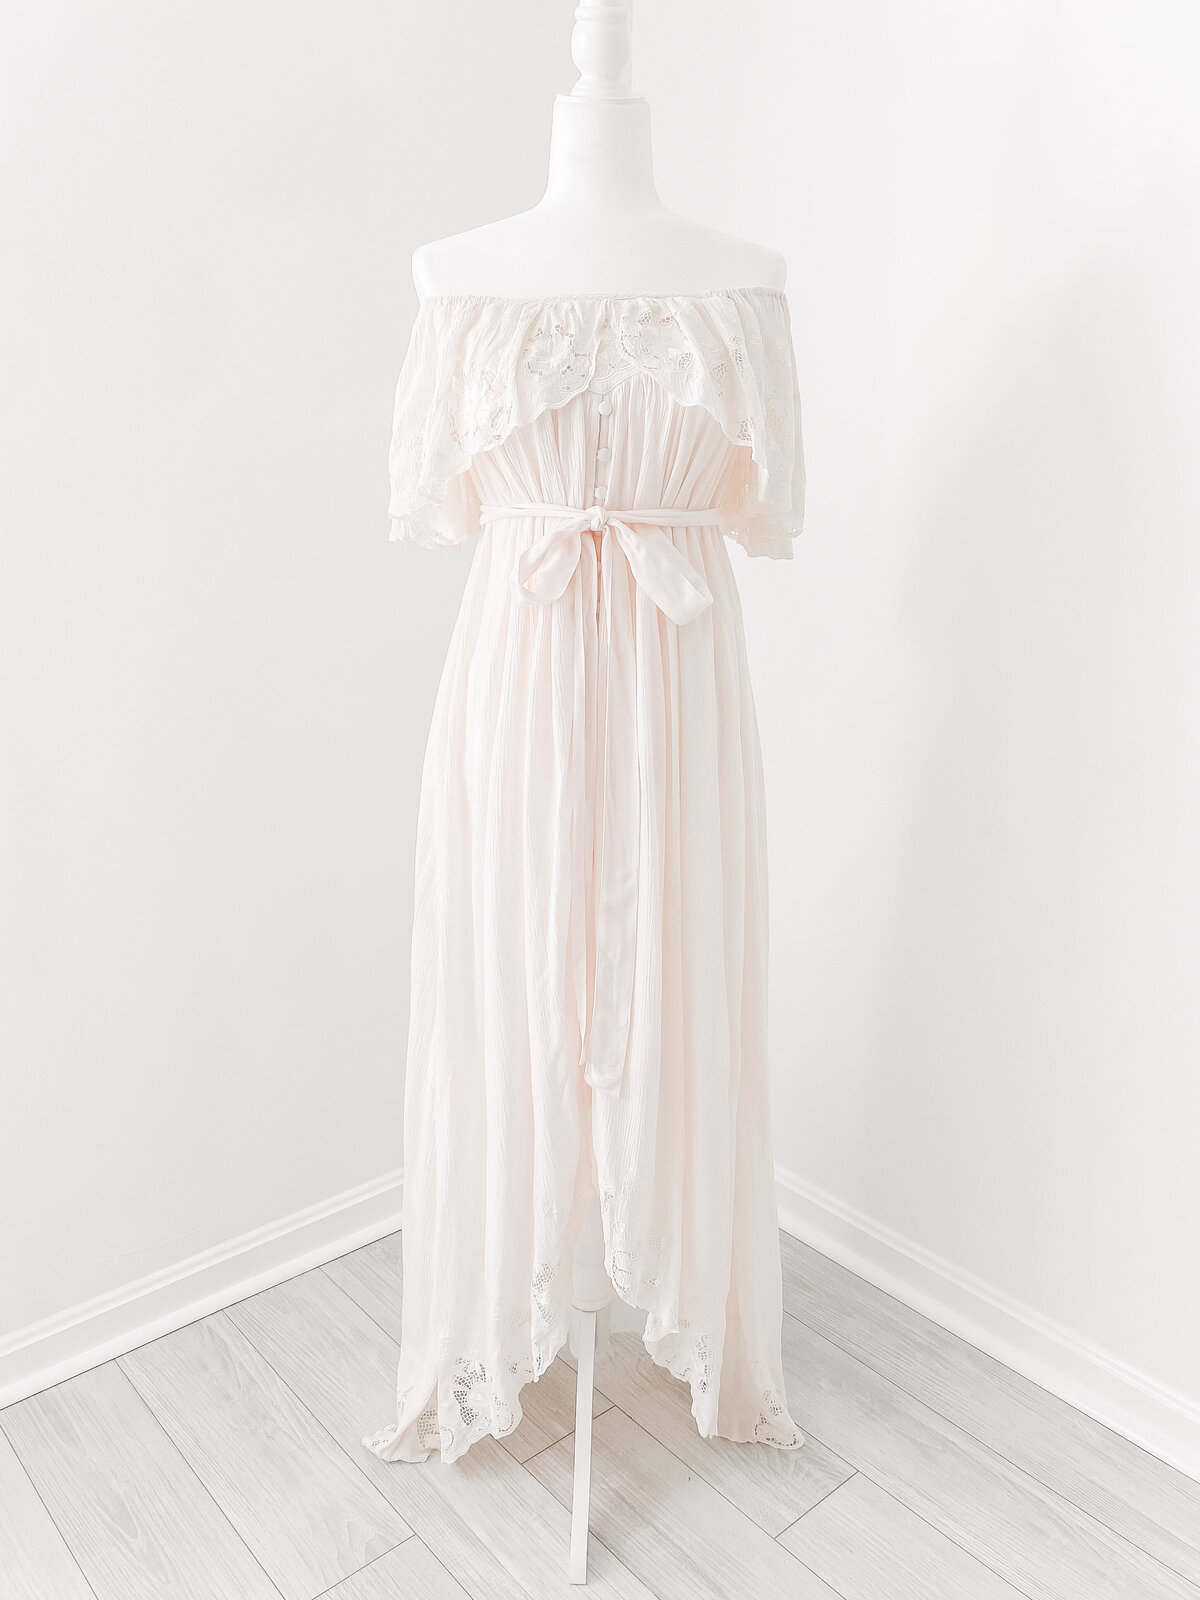 A flowy pink strapless dress with lace accents by DC Family Photographer